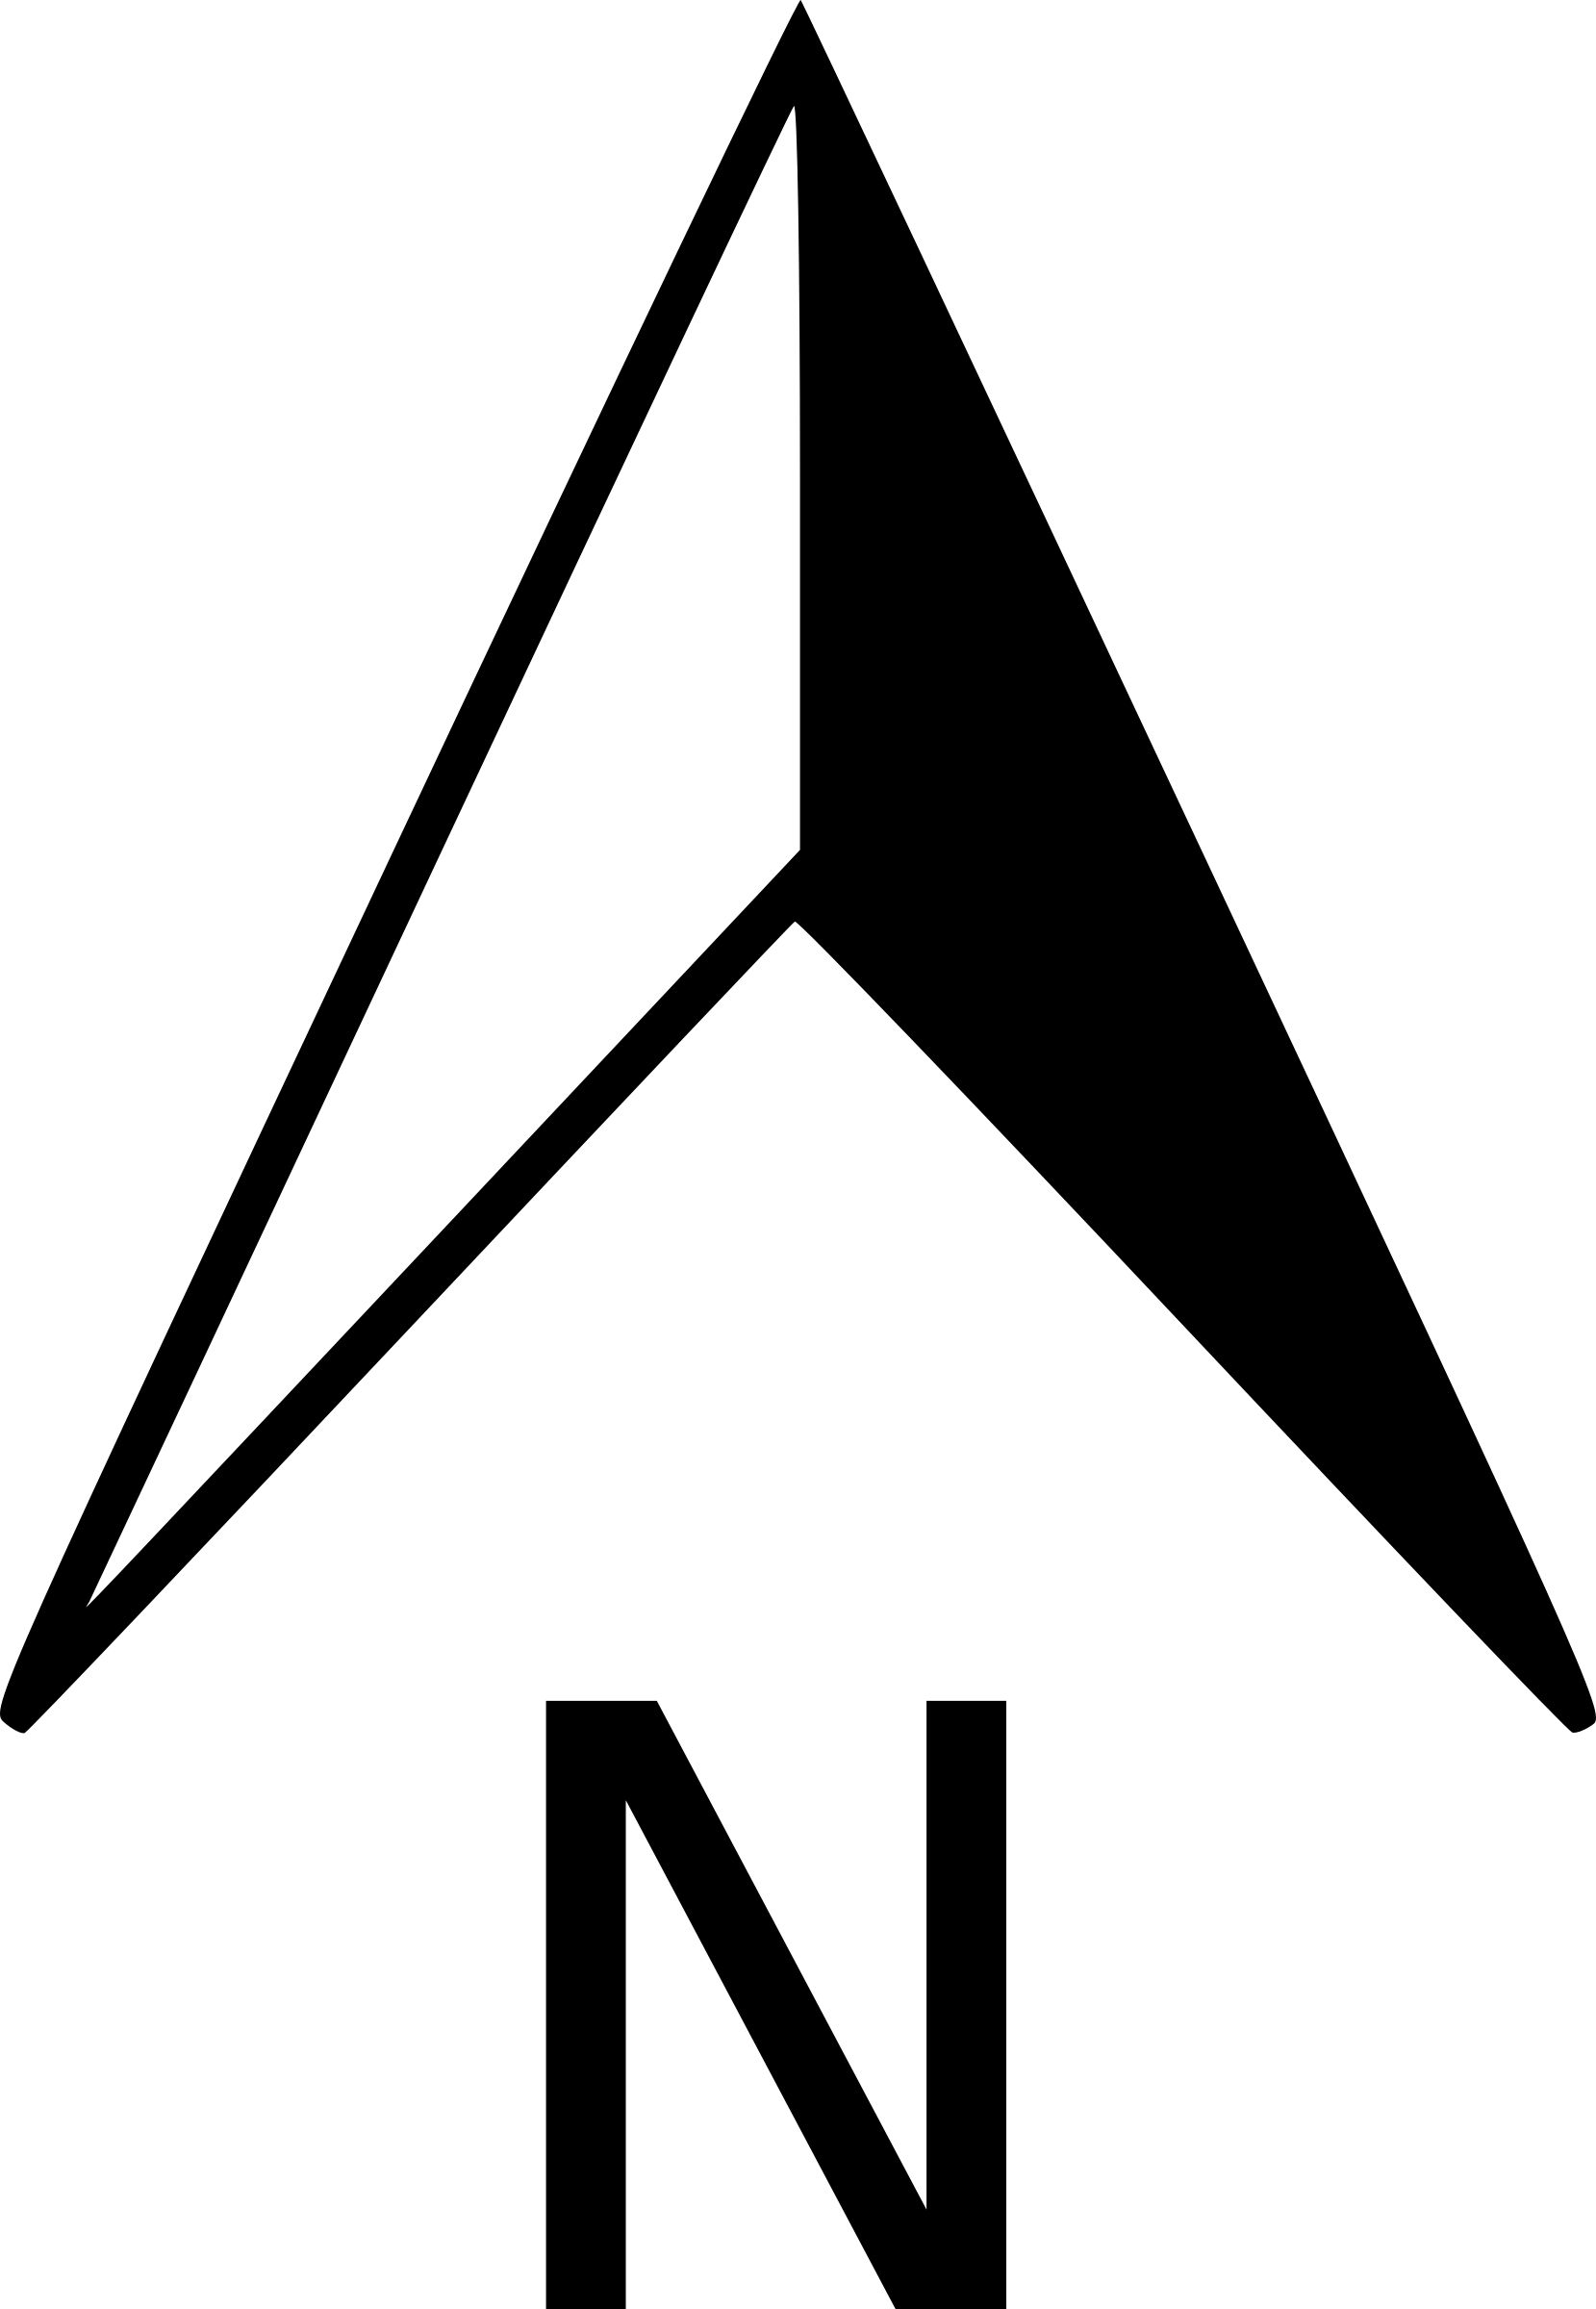 Compass North Logo - North arrow free stock svg - RR collections